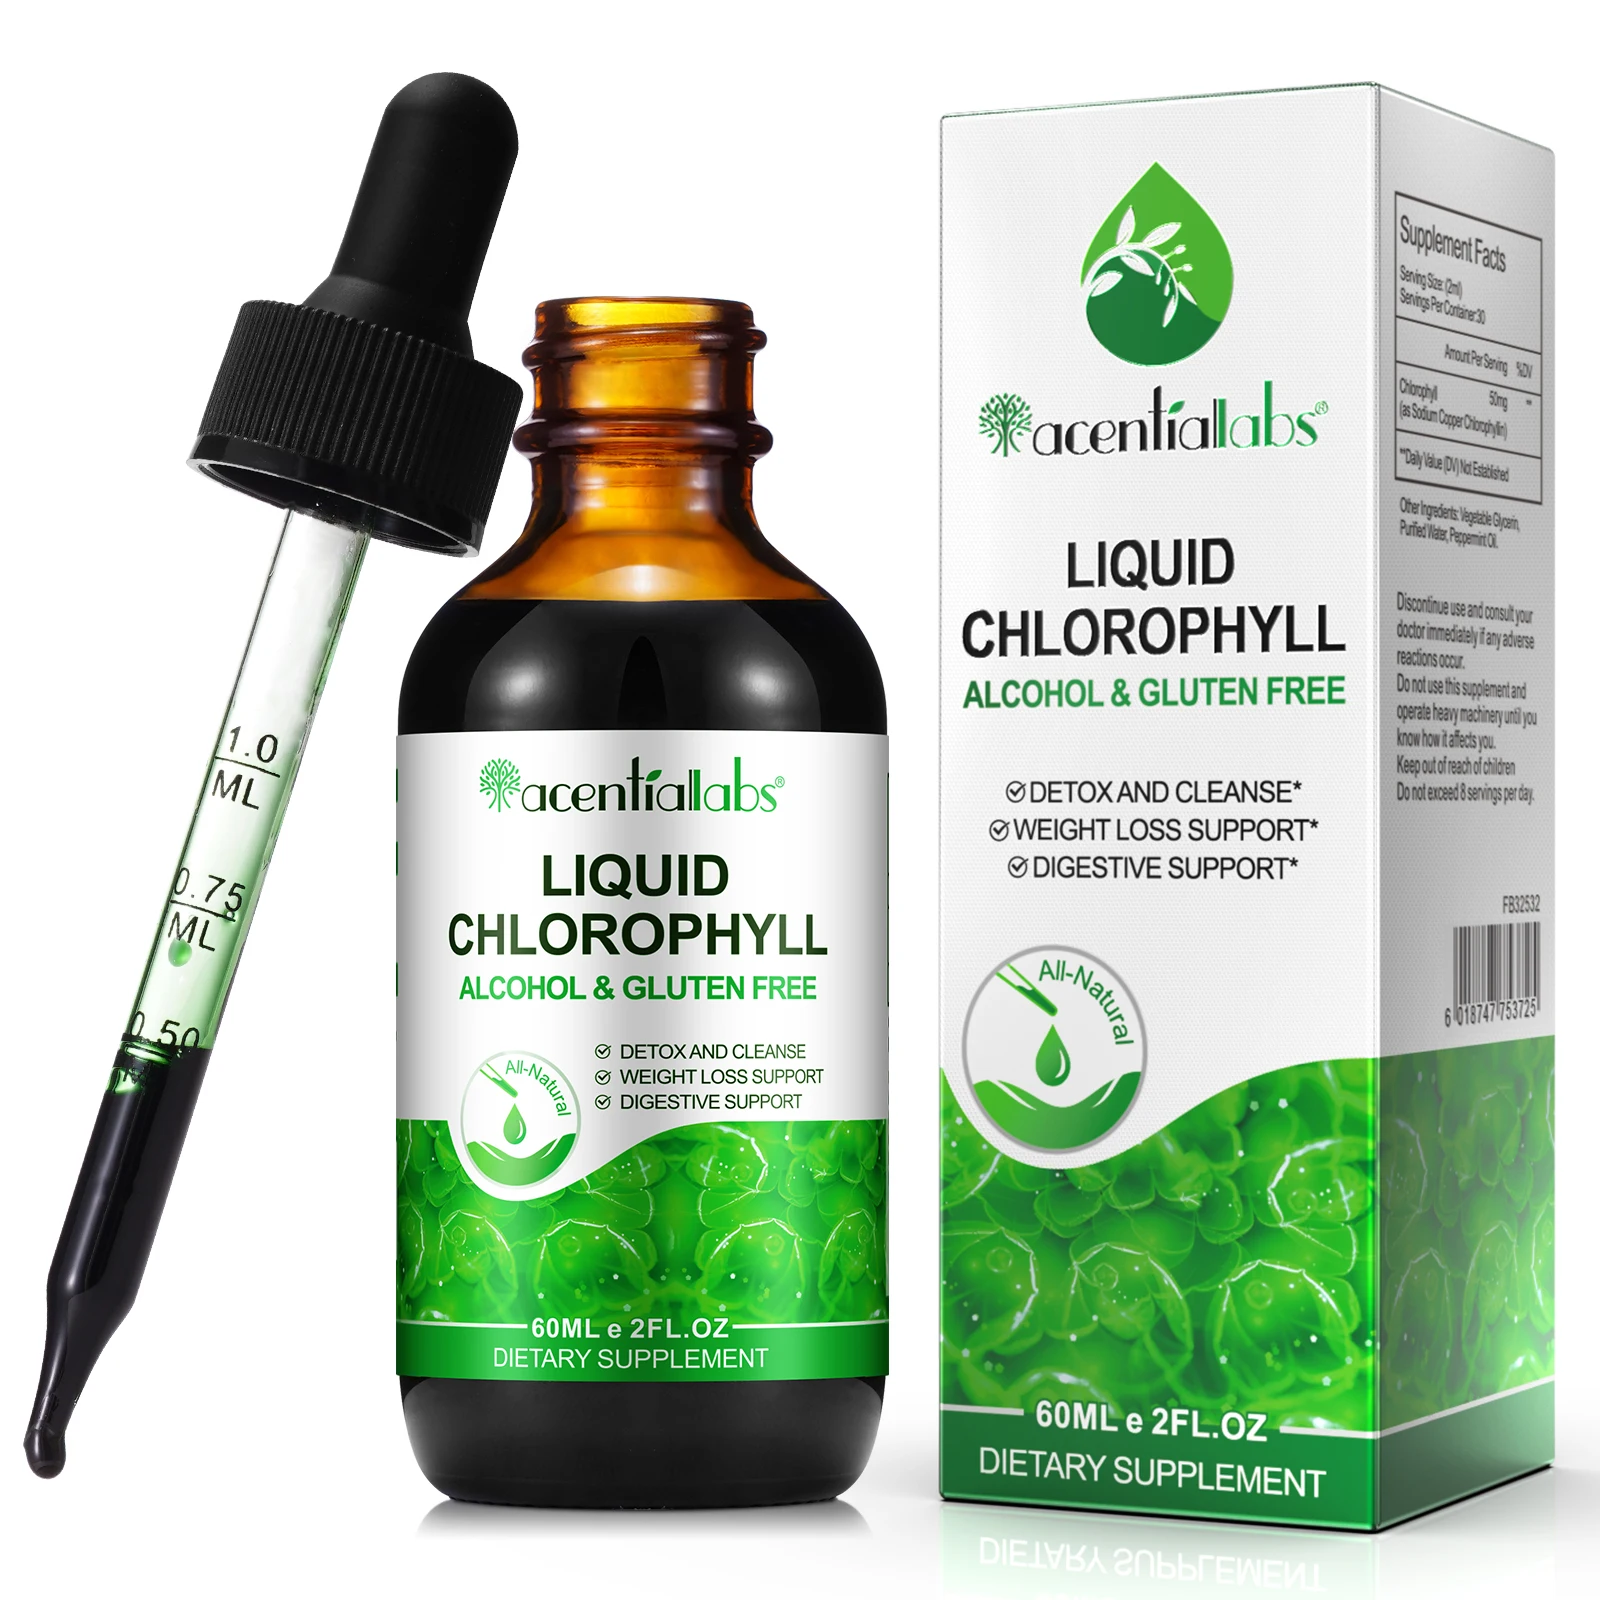 

Wholesale Liquid Chlorophyll Weitght Loss Digestive Support Private Label Natural Organic Chlorophyll Liquid Drops